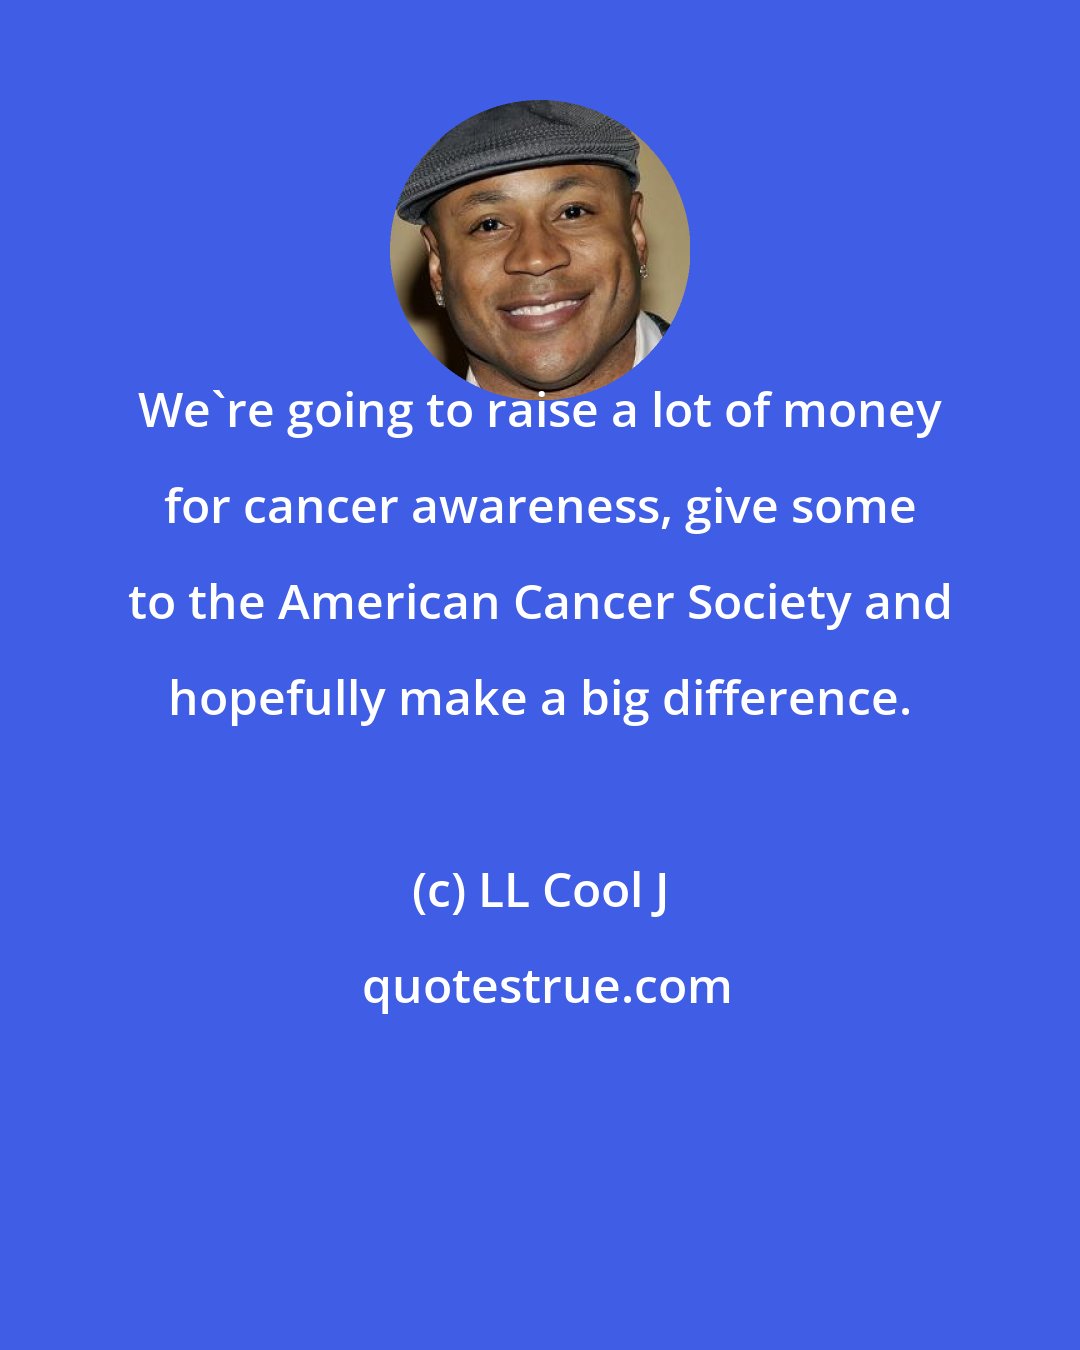 LL Cool J: We're going to raise a lot of money for cancer awareness, give some to the American Cancer Society and hopefully make a big difference.